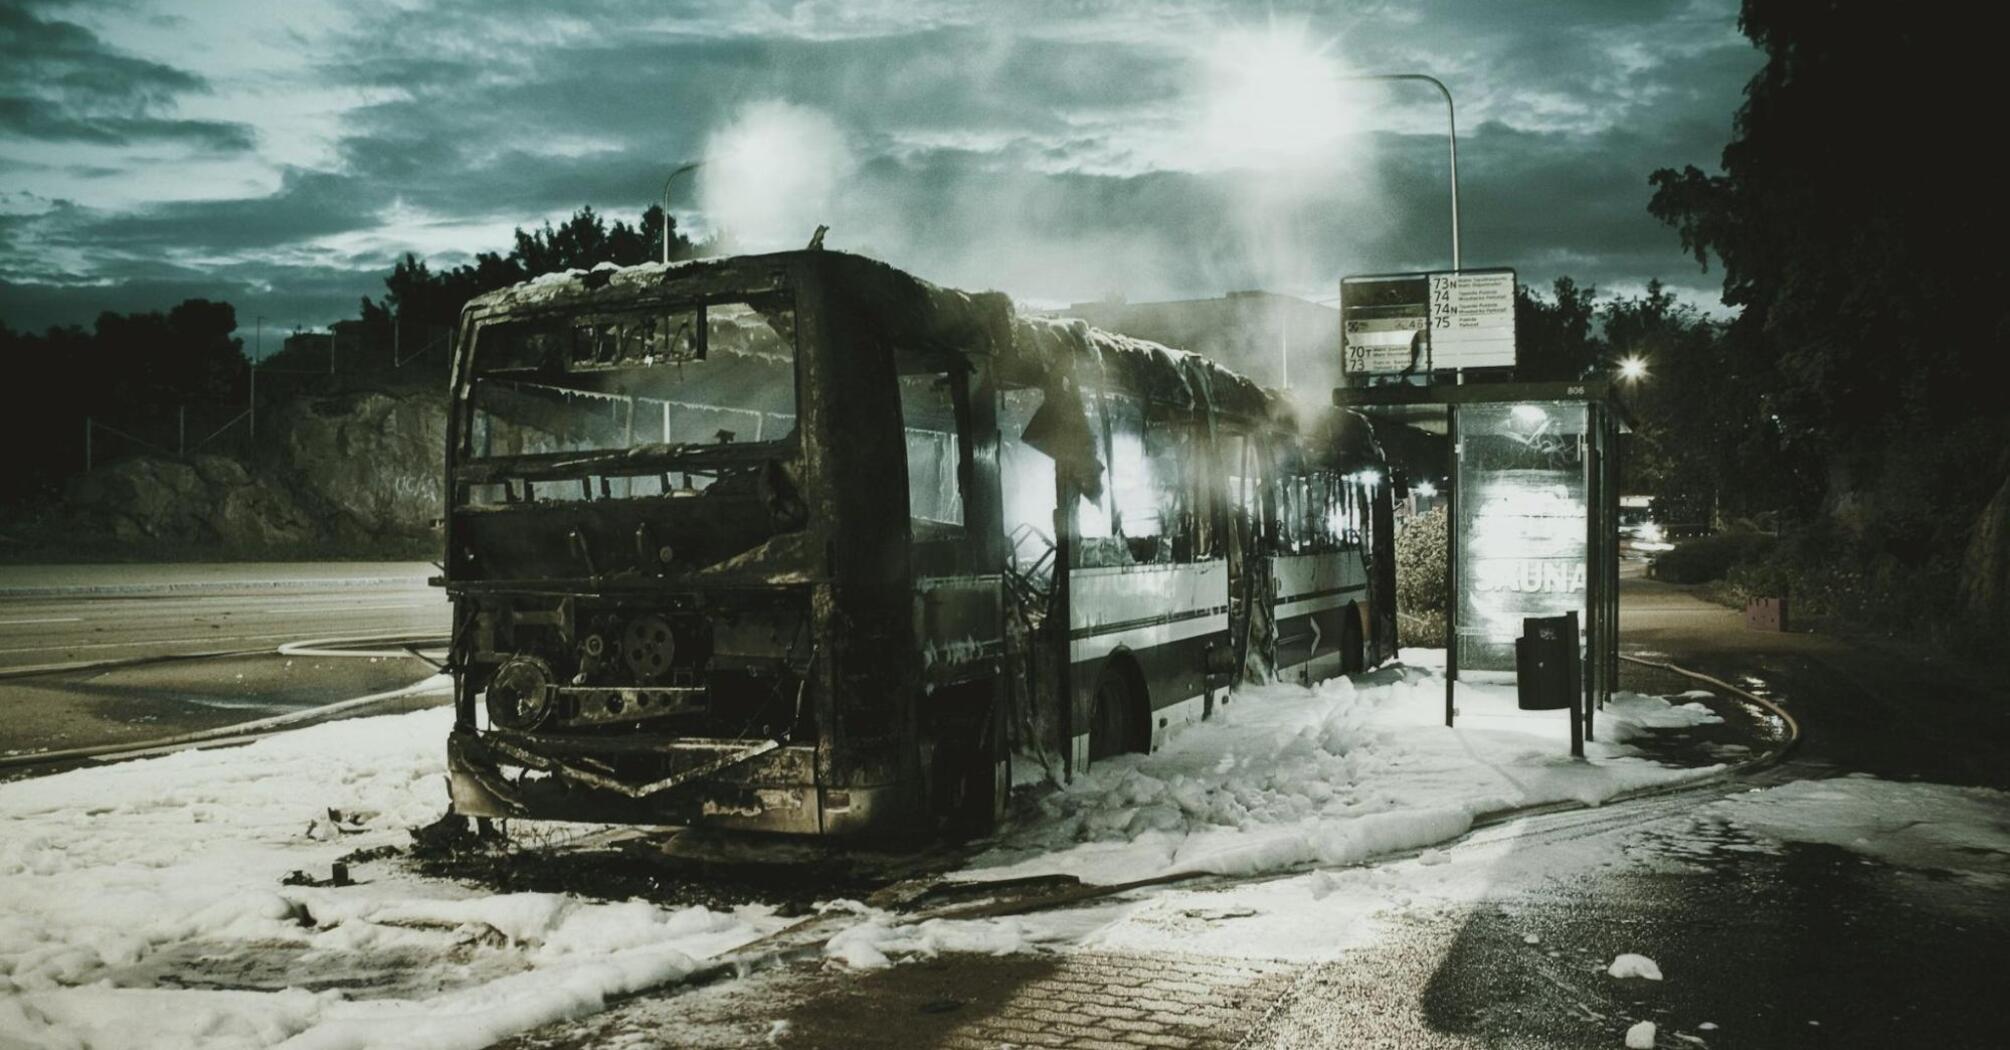 A burnt bus at the bus stop